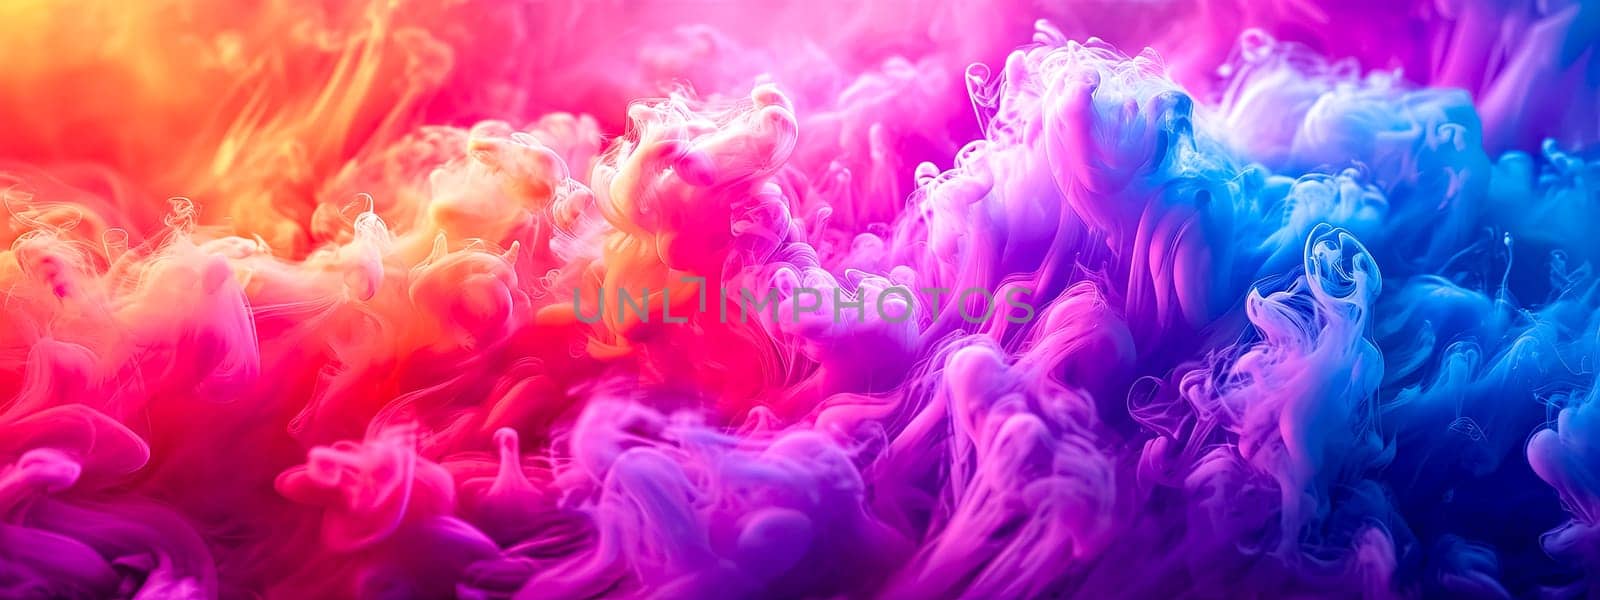 Vibrant plumes of pink and blue smoke swirling together in an ethereal dance. by Edophoto